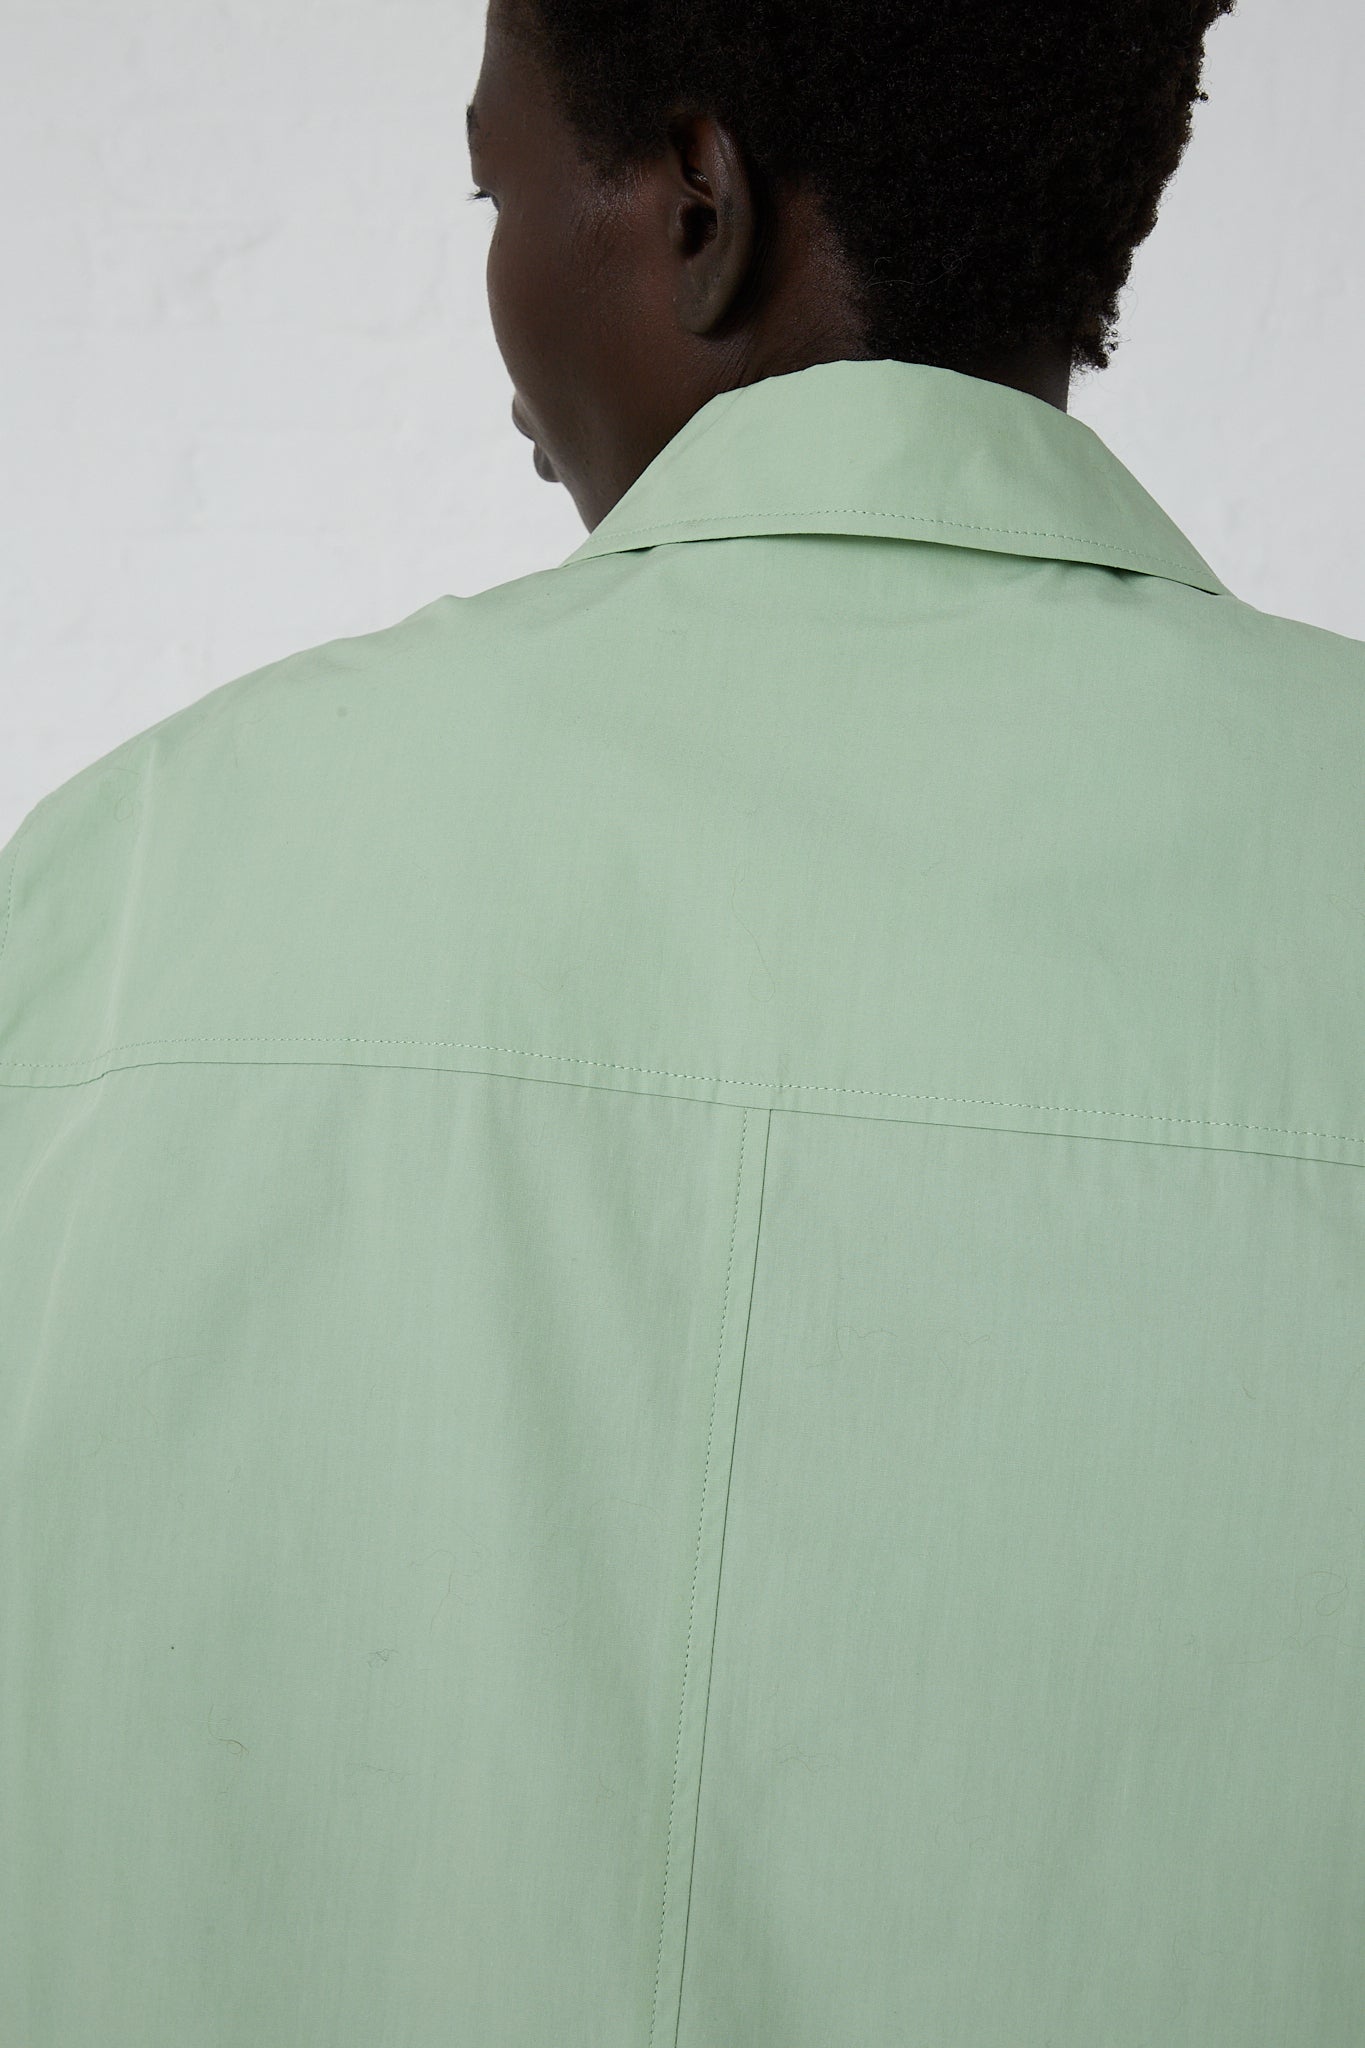 A woman wearing a Rejina Pyo Organic Cotton Caprice Shirt in Mint with a front button closure.